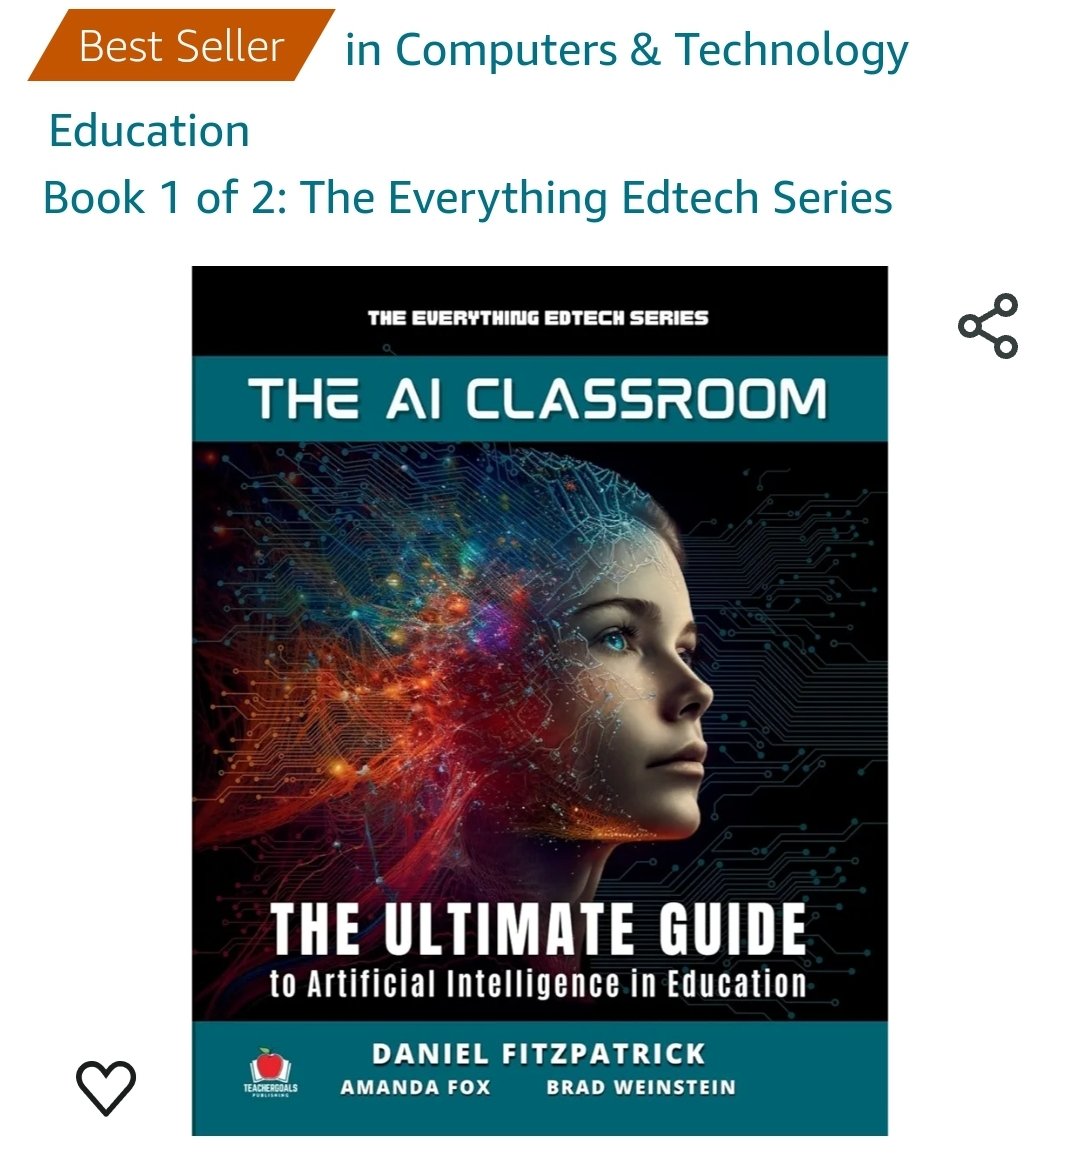 So proud that our book is a bestseller on its 1st birthday! 🤖 Order: amzn.to/3TX8Ald